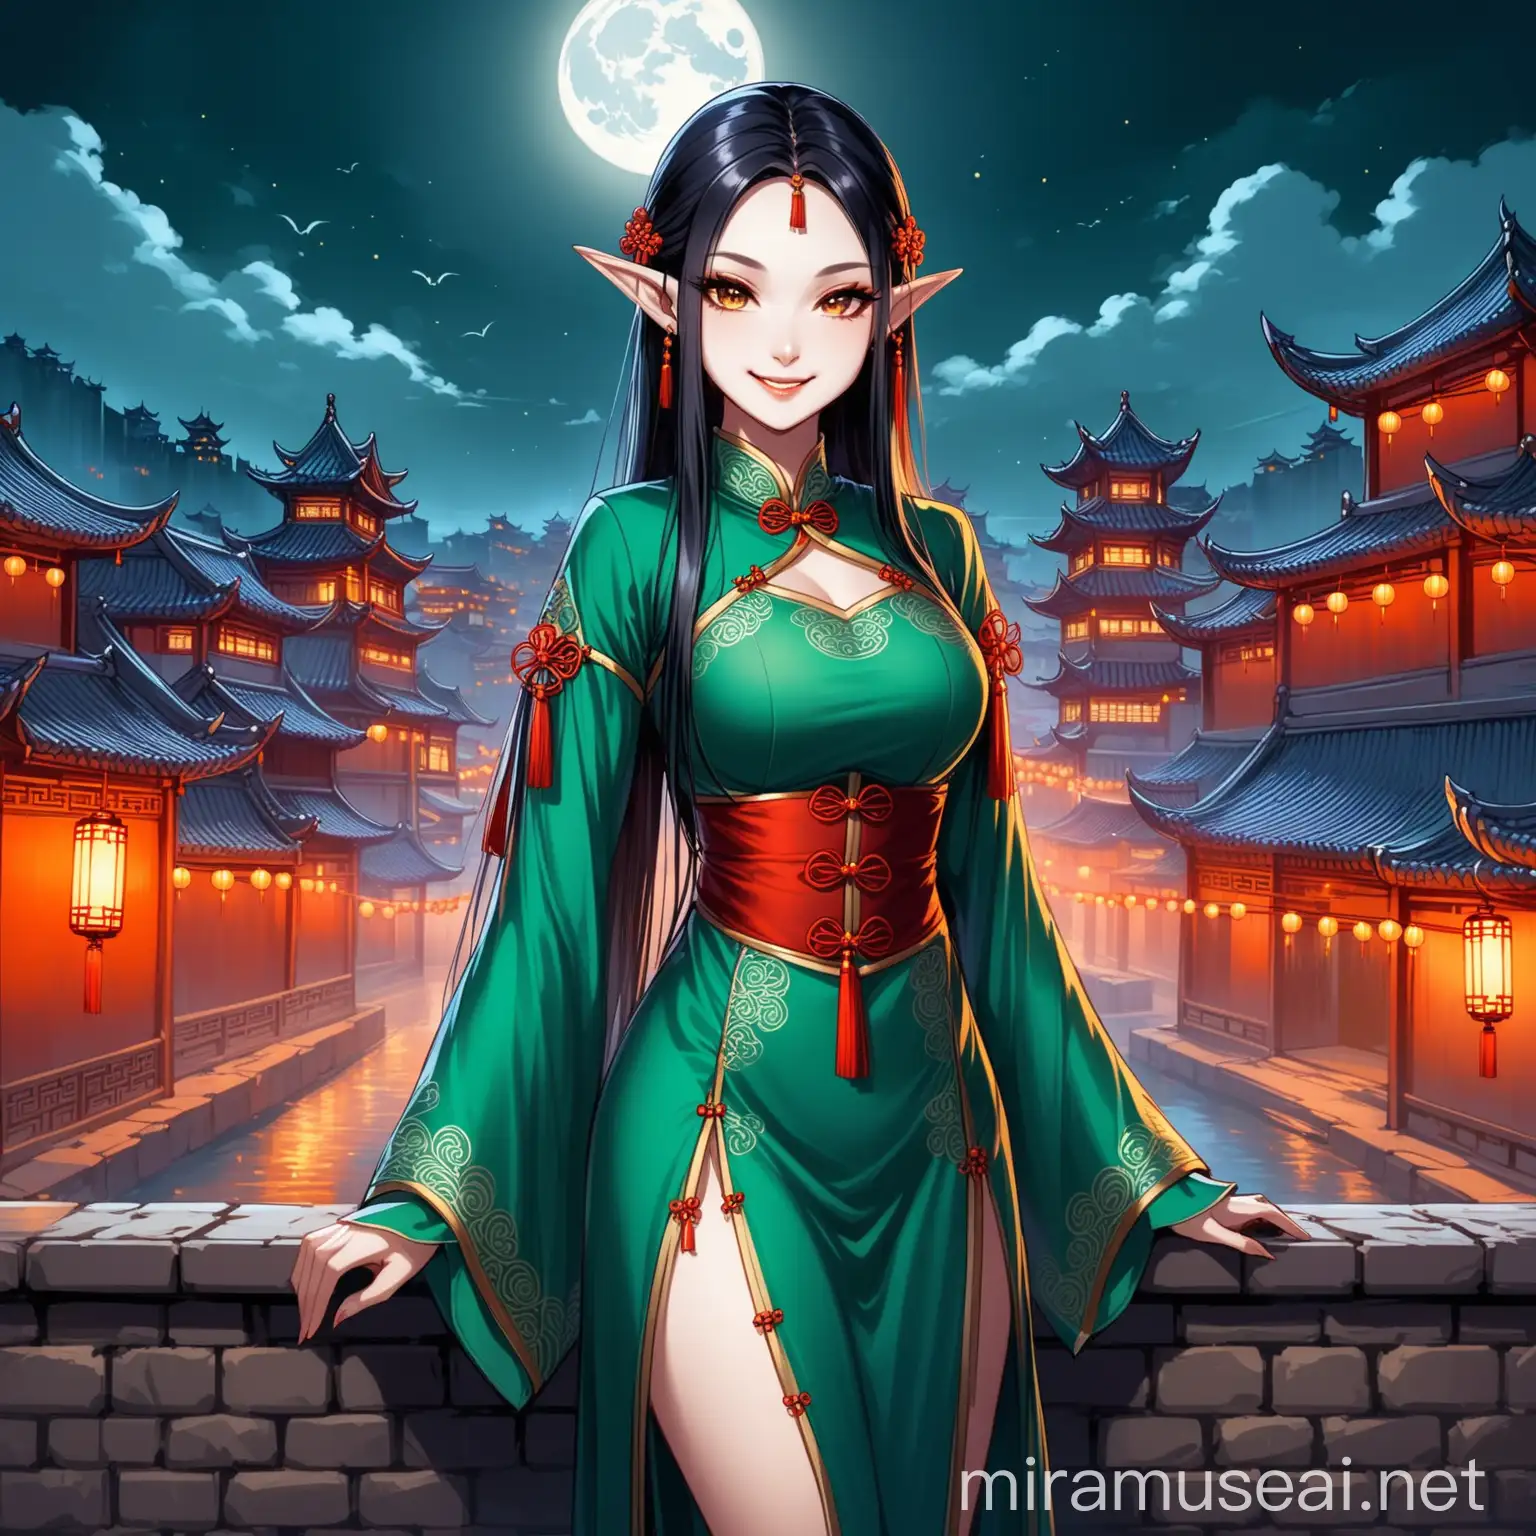 chinese clothes, noble elf female smilling evily, refined, full moon, evil, night medieval chinese city background